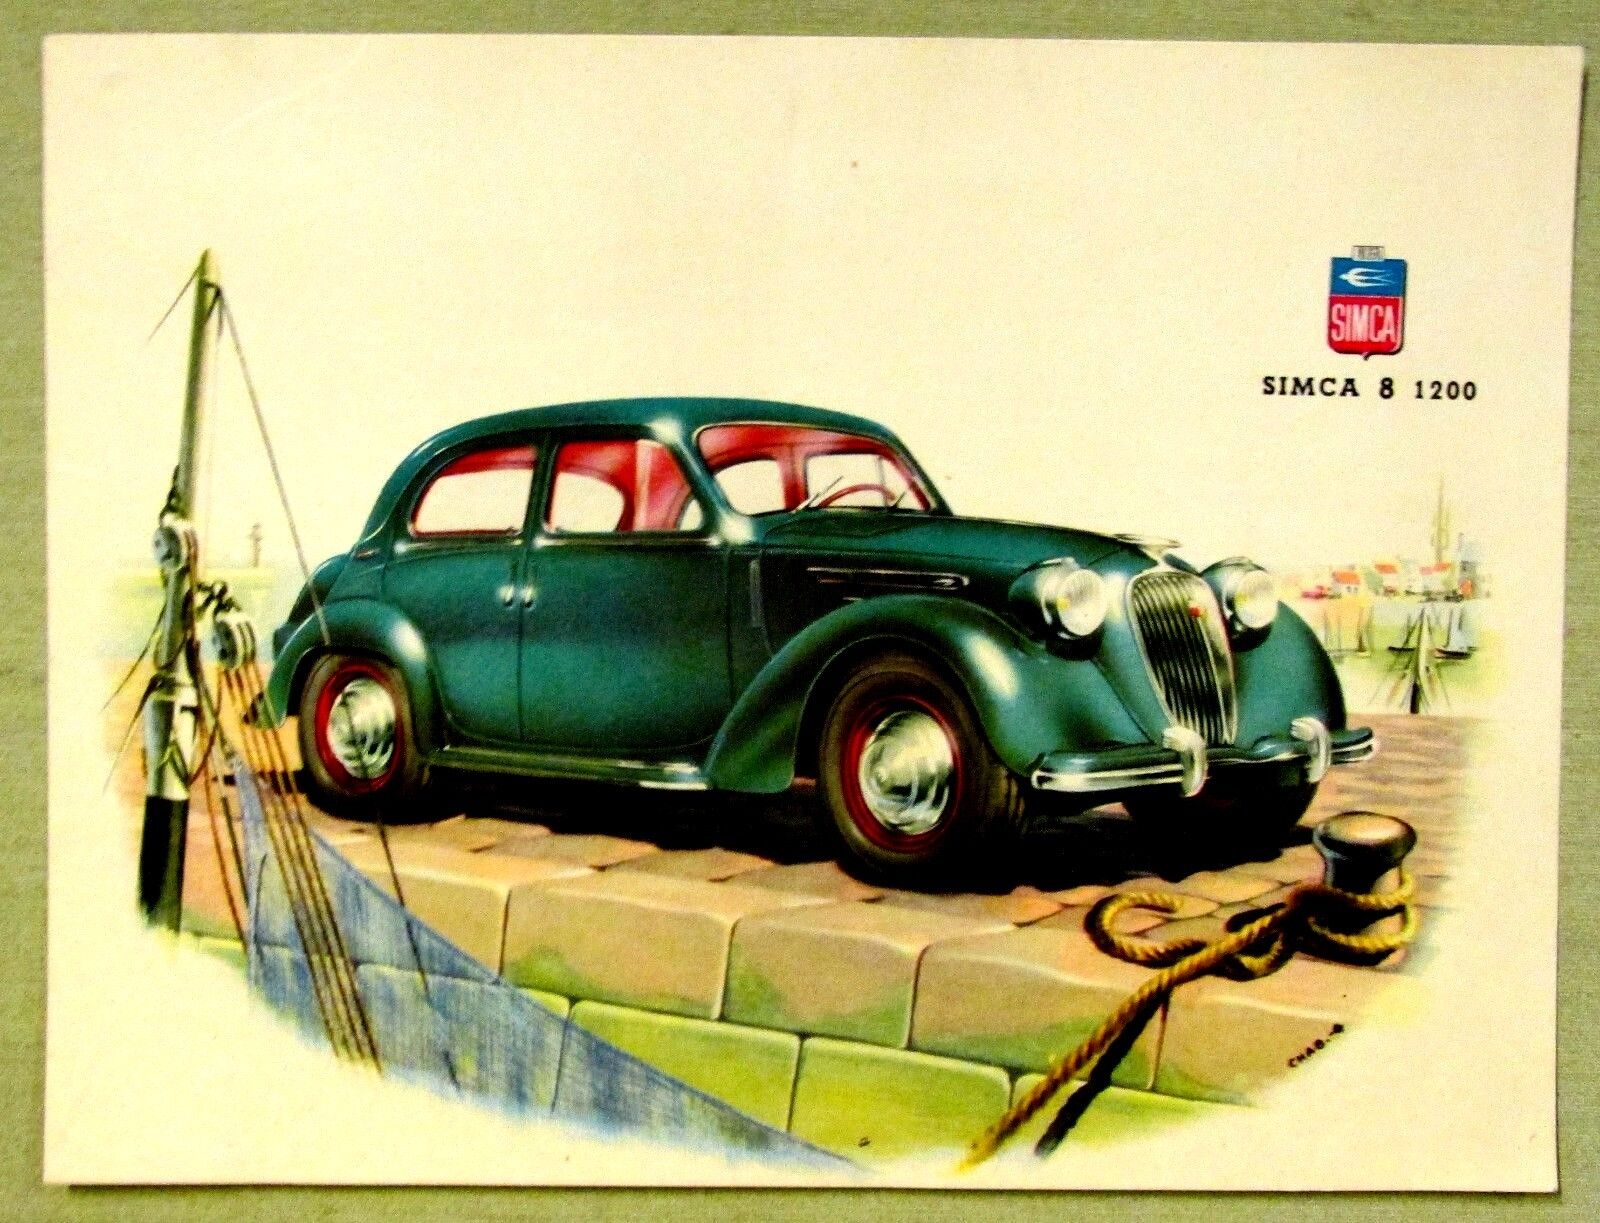 RARE Vintage SIMCA 8 1200 CAR VAN AUTO ADVERTISING INSERT AD FRENCH FRANCE FIAT